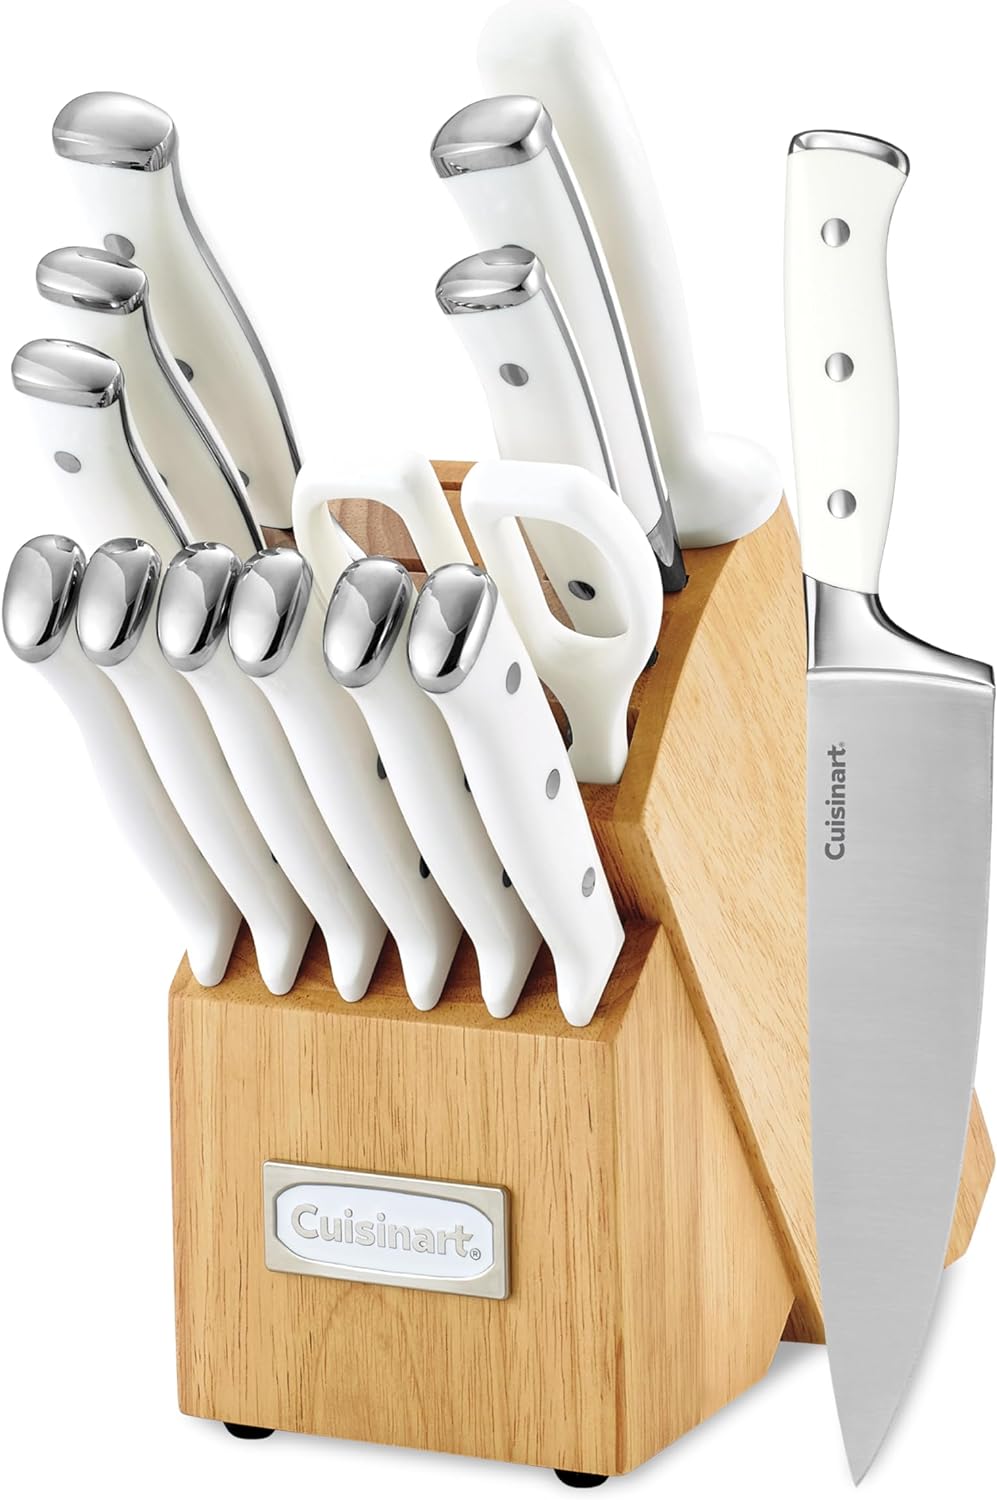 As usual Cuisineart delivers an excellent product at a very affordable price.These knives come razor sharp right out of the box and have a beautiful appearance. The steel has held up well against tougher substances such as dried sage with minimal loss of sharpness.The sharpener that comes with it is also very good, I touched up my pocket knives with it and it brought them back to a sharp edge in just a few minutes.Absolutely recommend, I generally purchase chefs knives in the range of $250-1000 